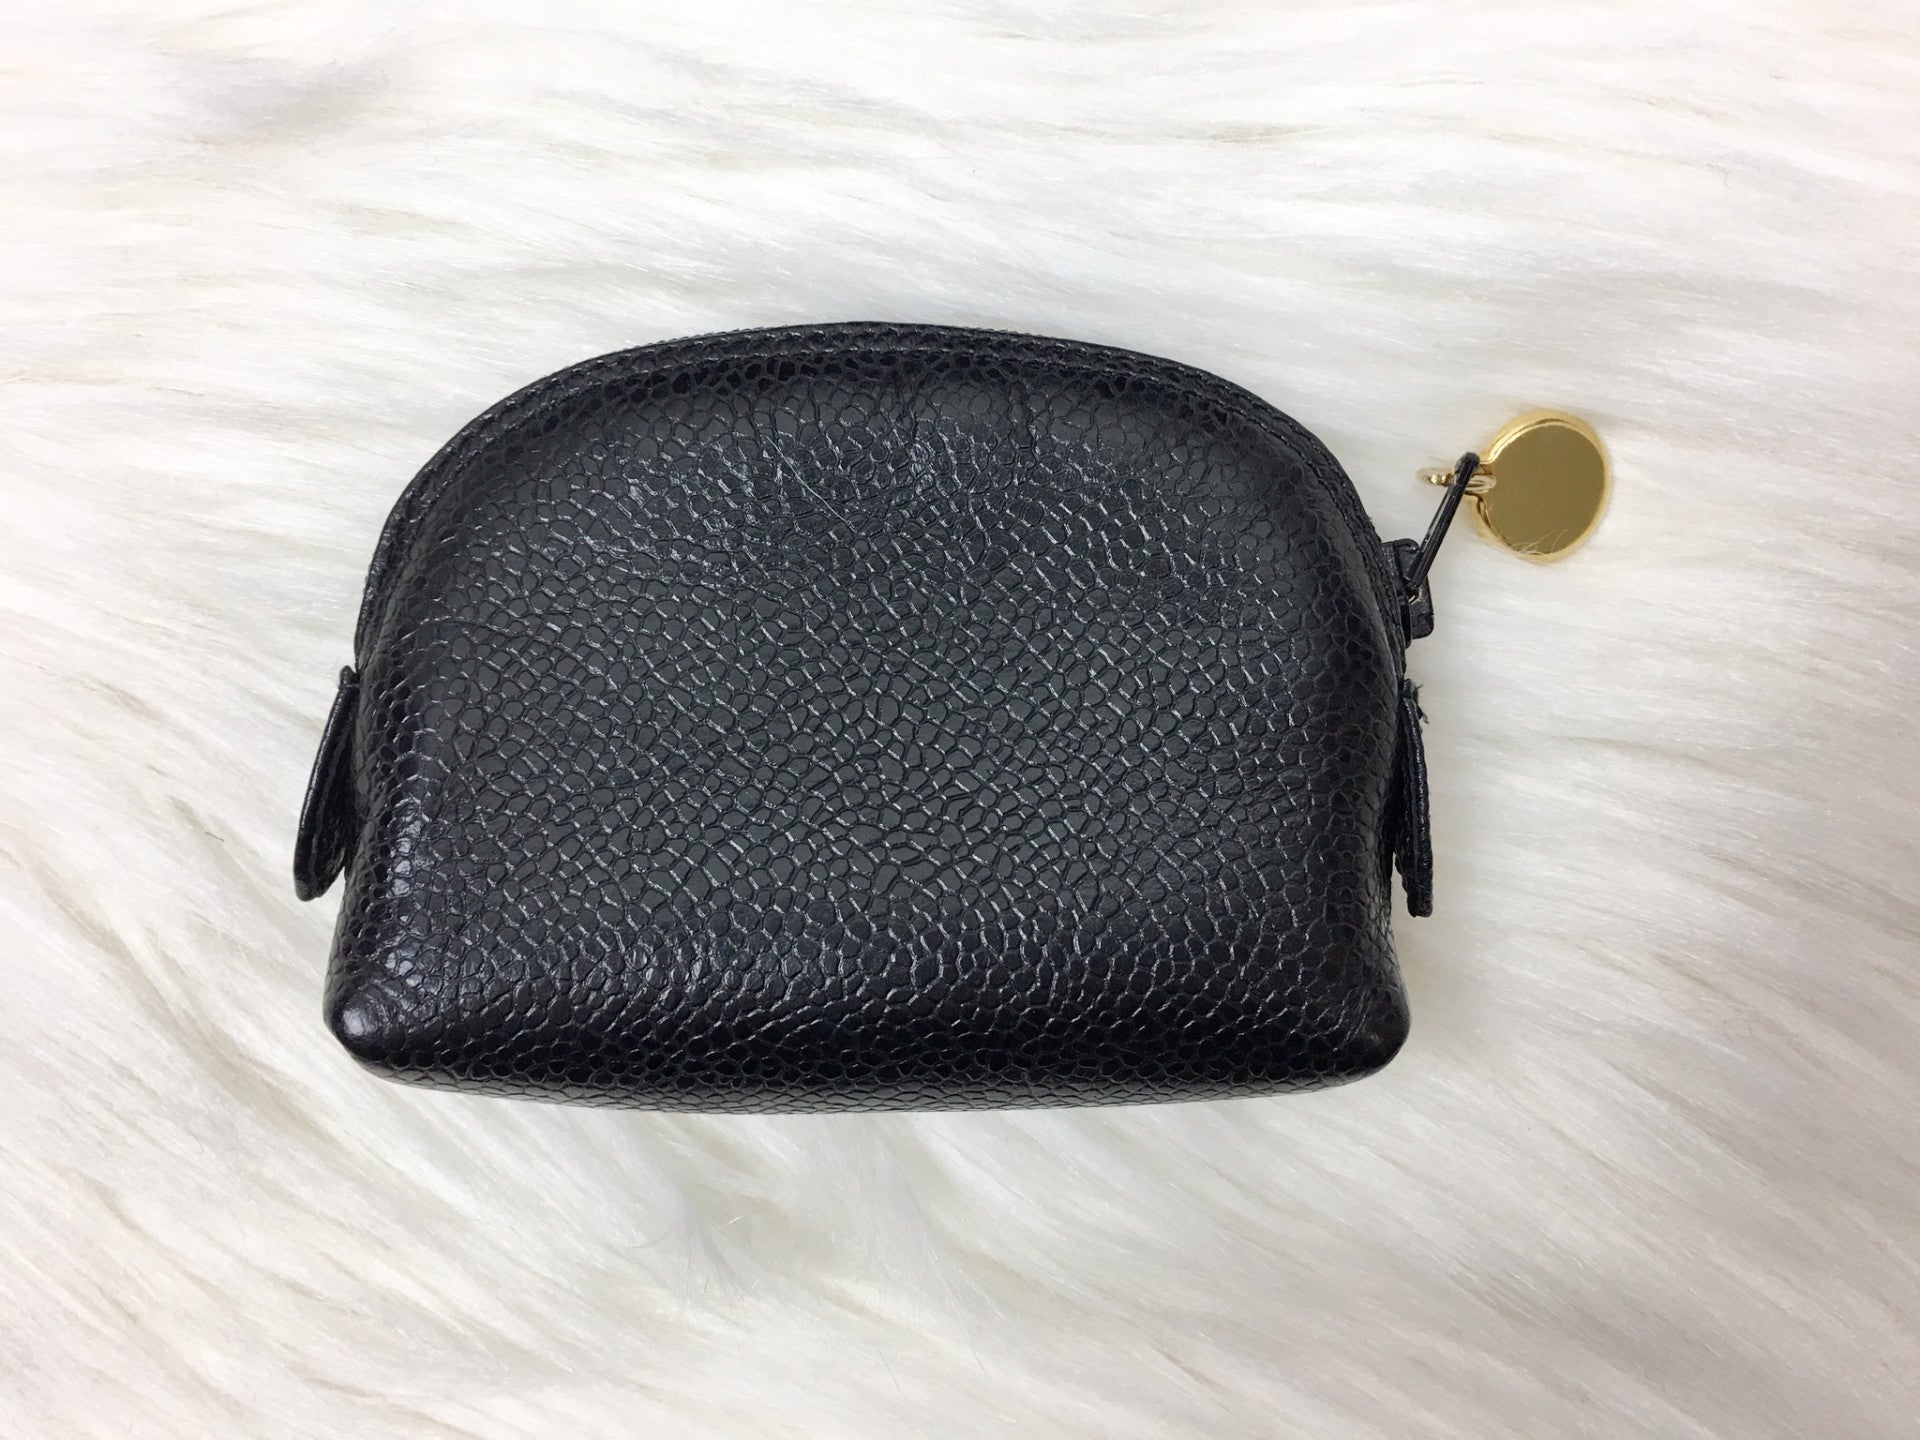 CHANEL CC Caviar Leather Coin Case / Pouch